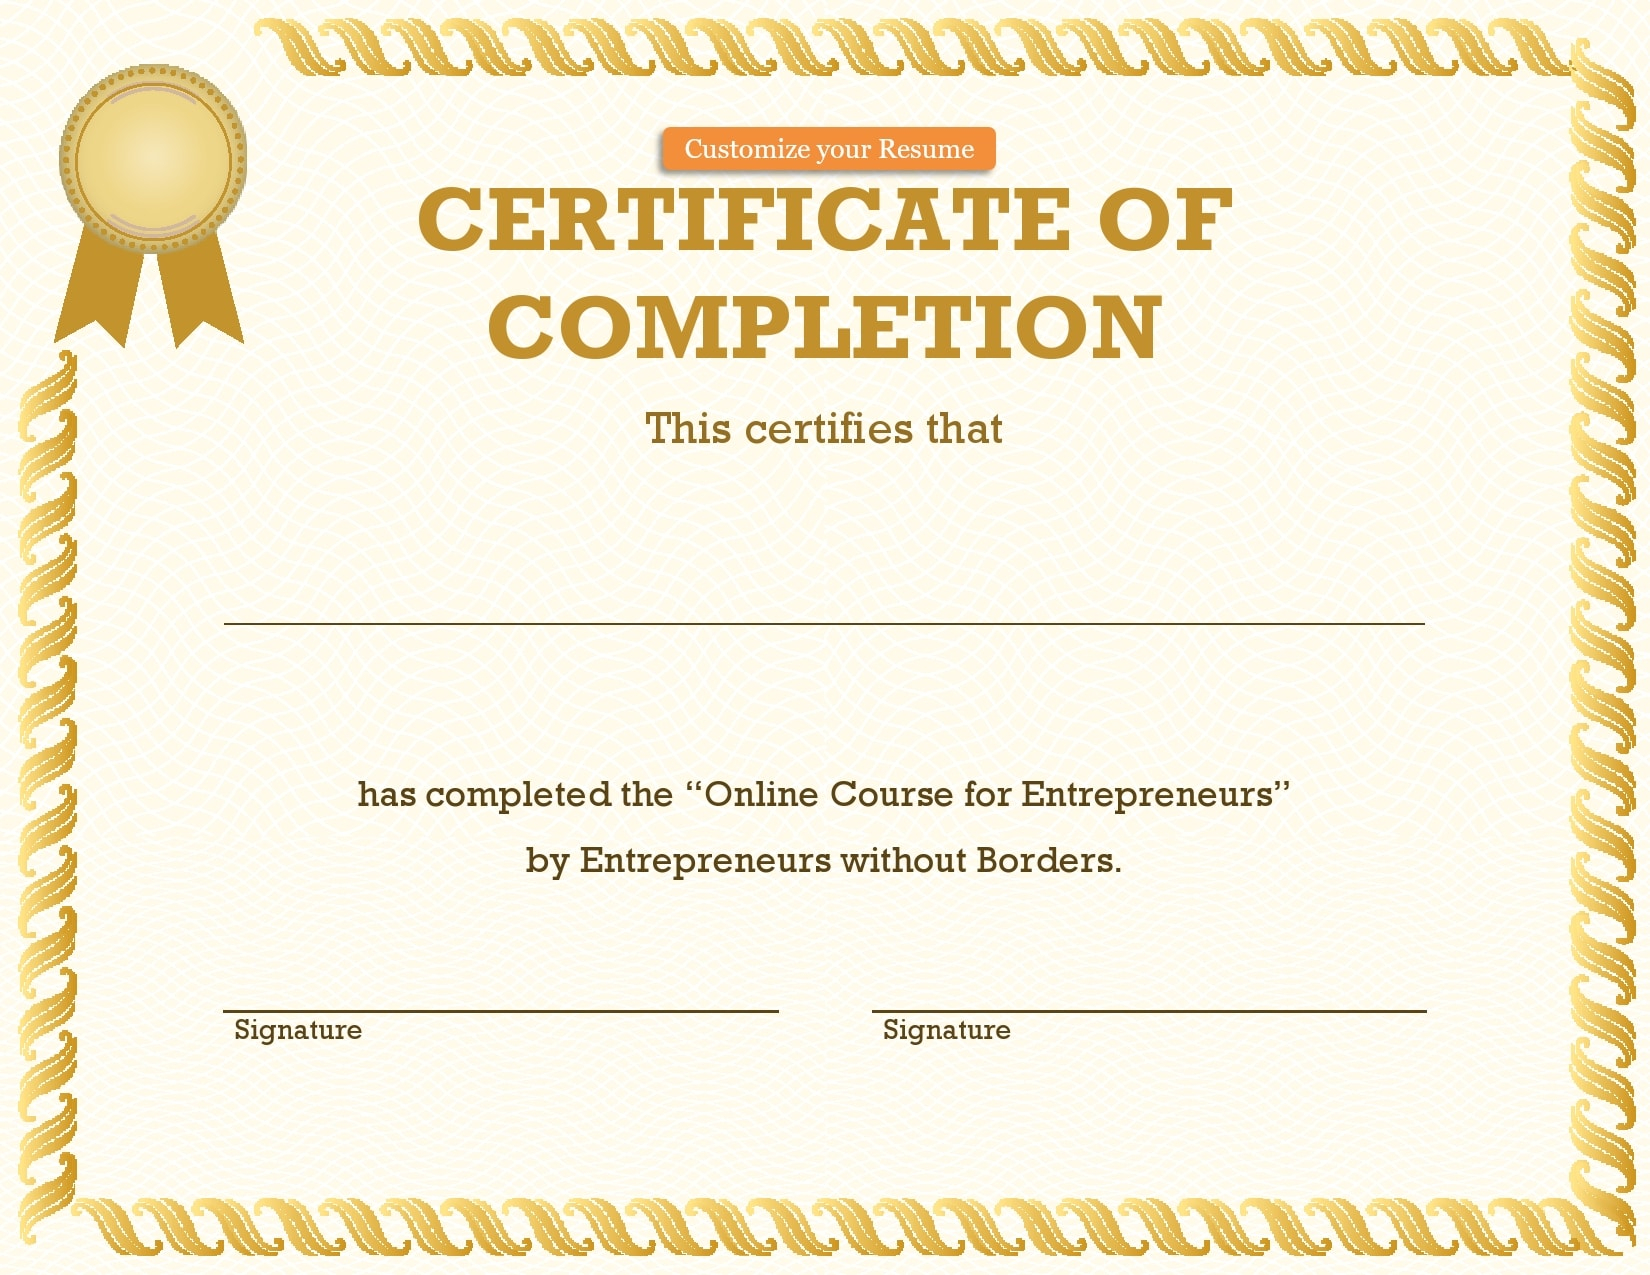 10 Great Certificate of Completion Templates (10% FREE) Throughout Free Training Completion Certificate Templates